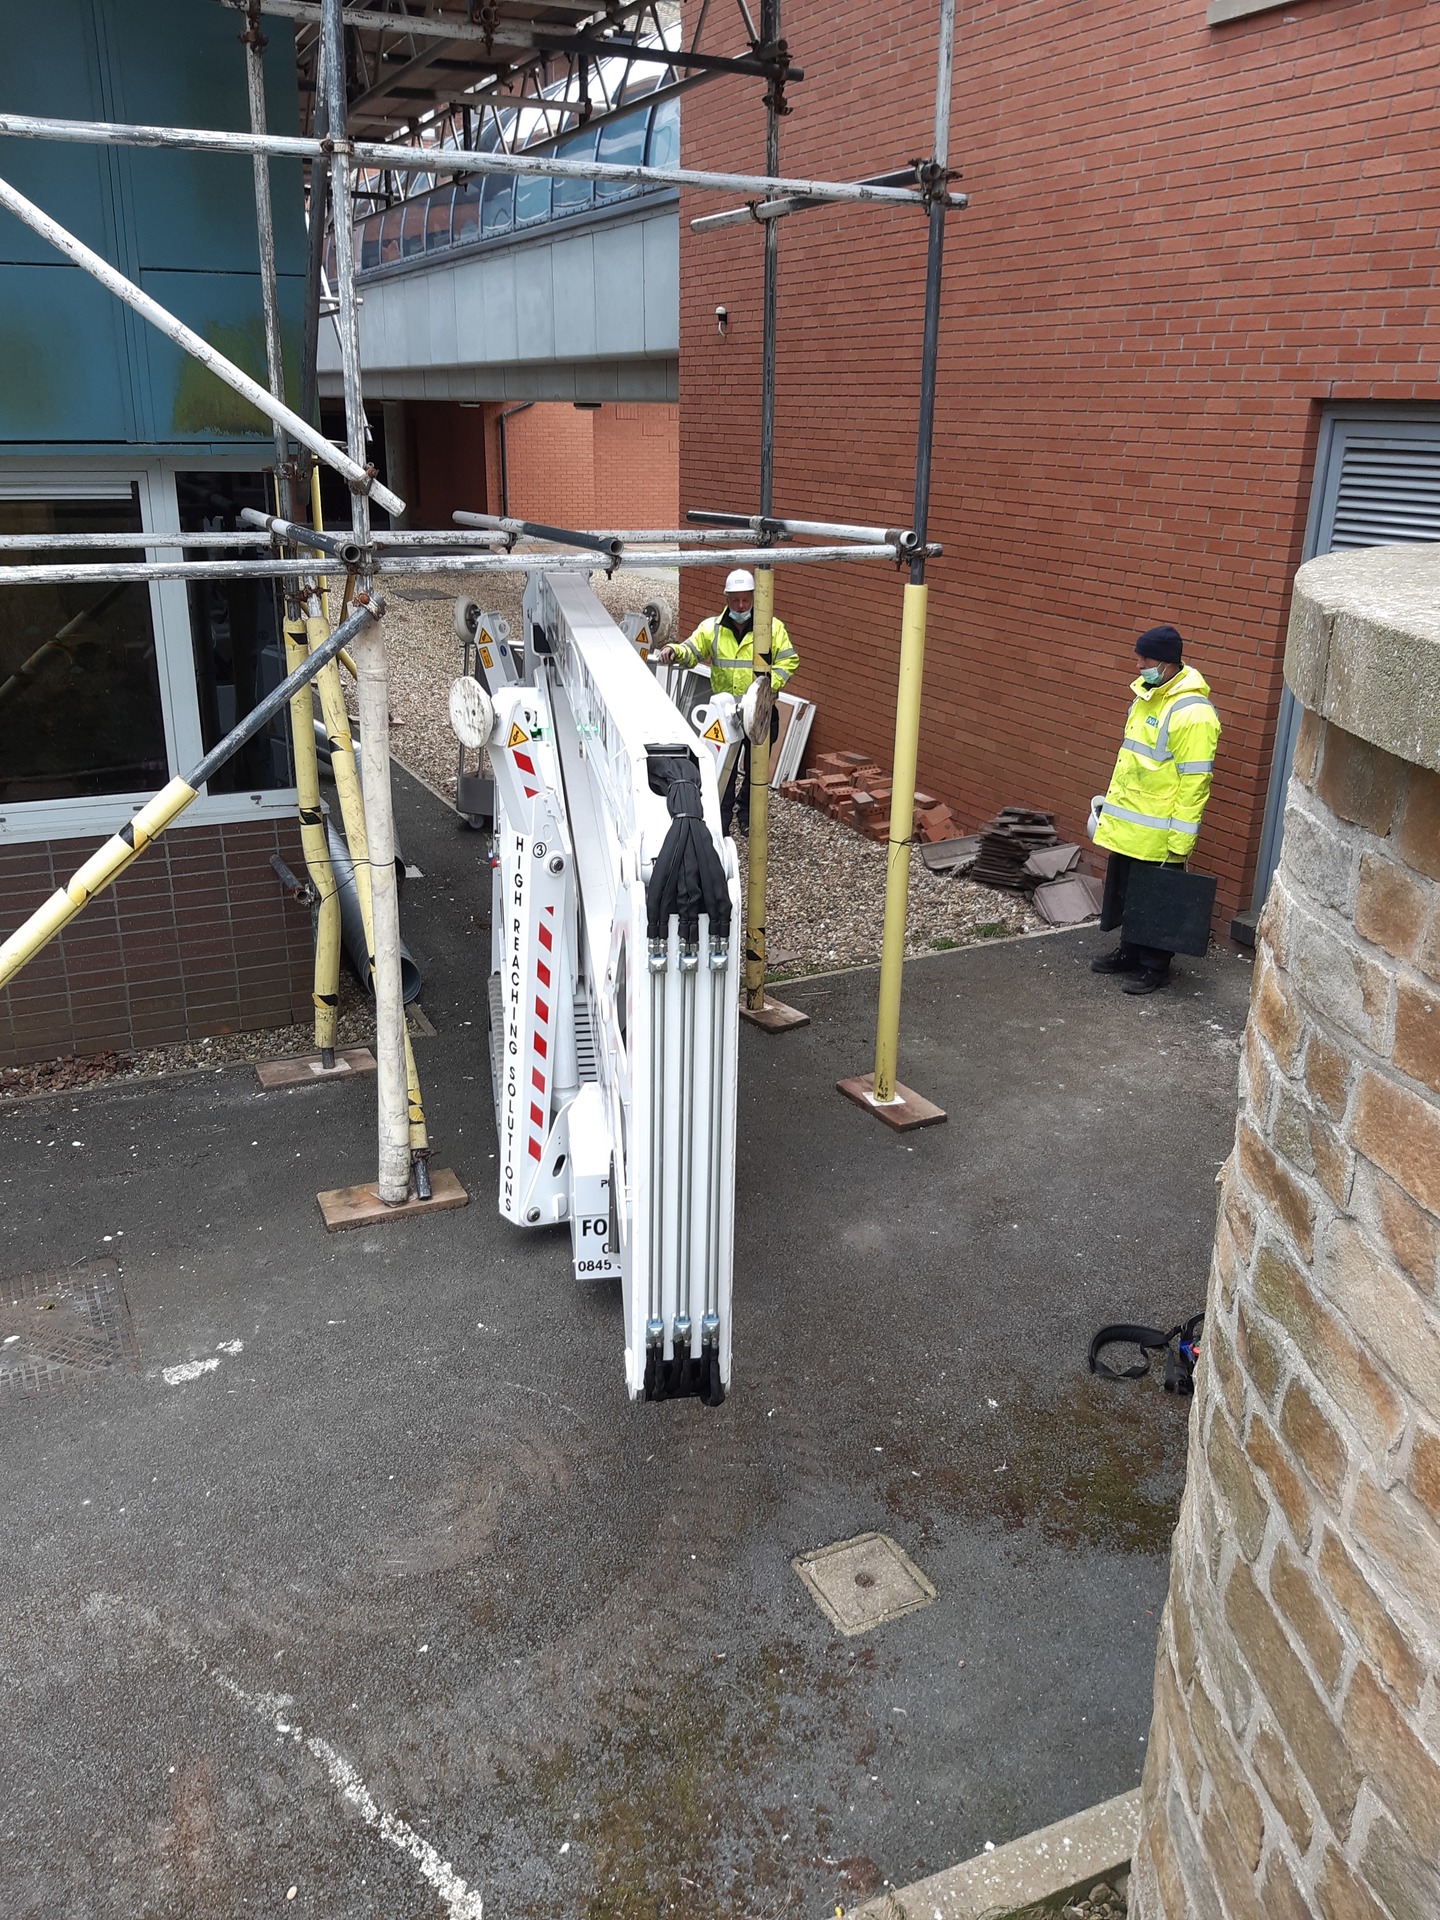 Lottie, High Reaching Solutions 20m Lithium hybrid tracked spider lift cherrypicker, on narrow tracked setting, moving through Scaffolding to exit the worksite in Scarborough, North Yorkshire.